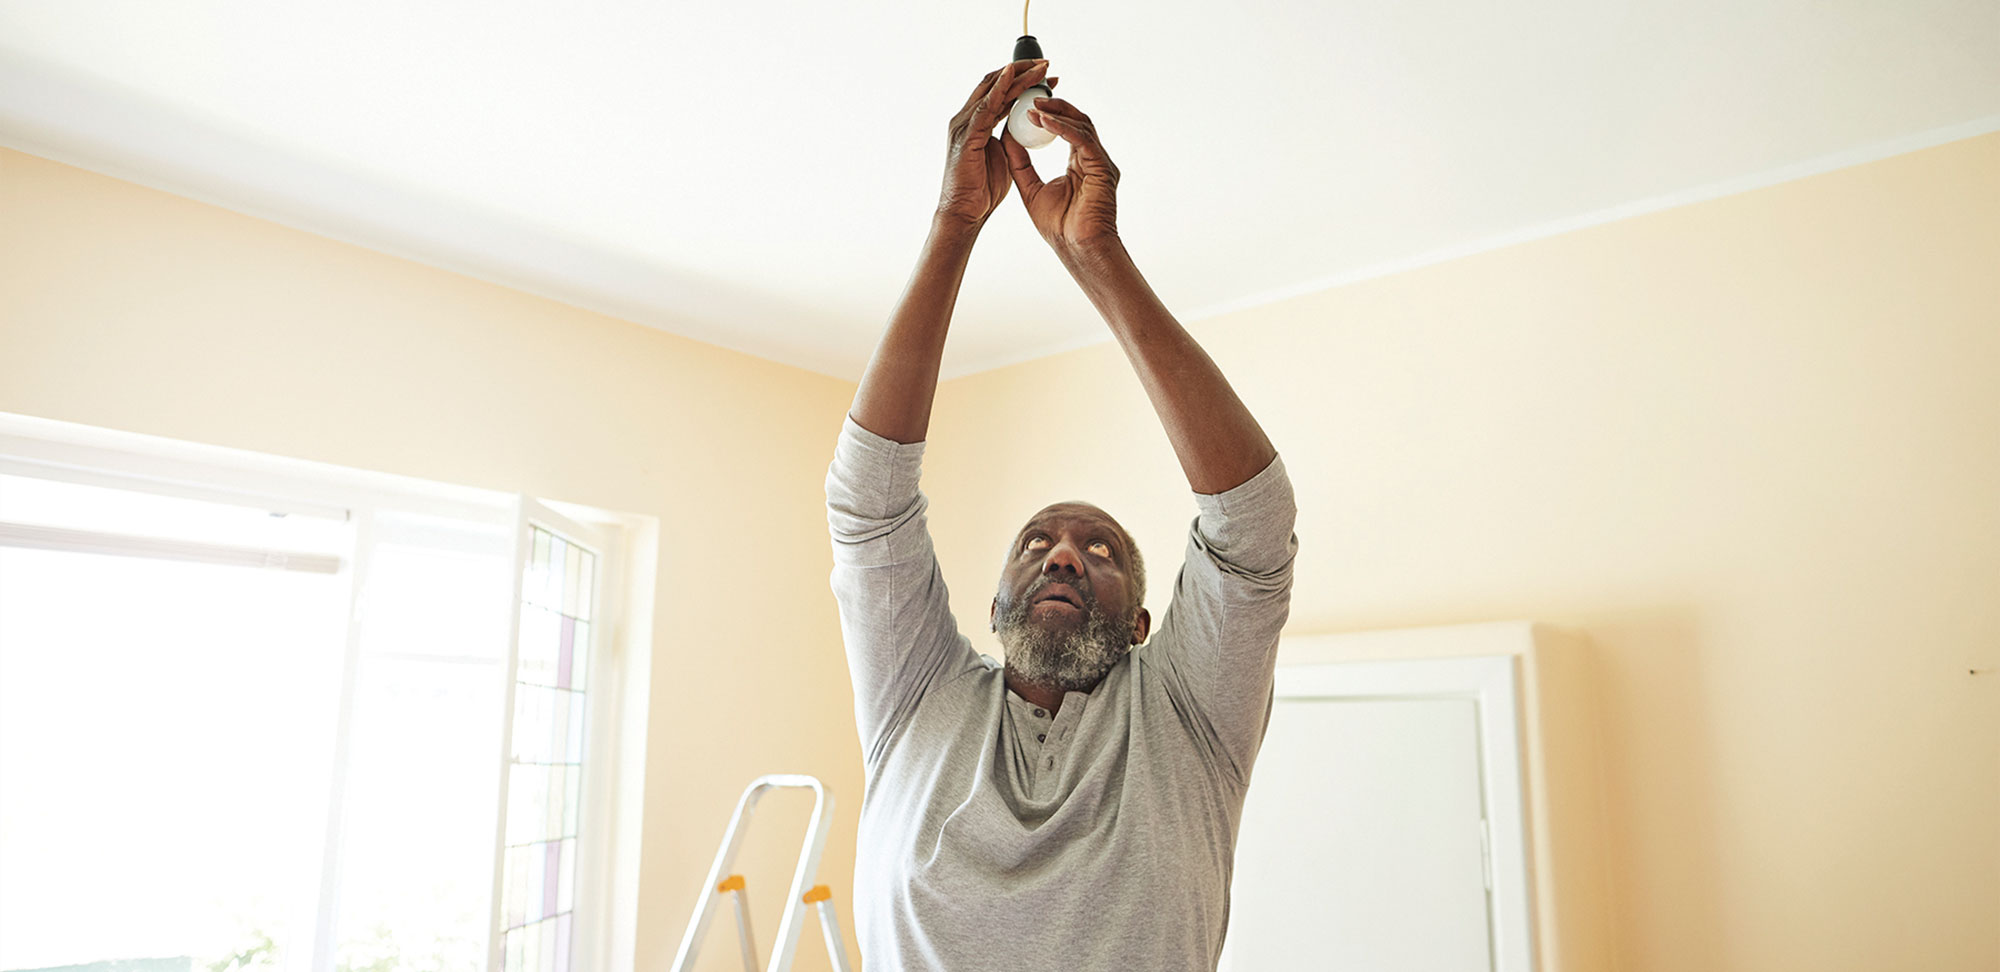 Photo of a Man changing light bulb while renovating home